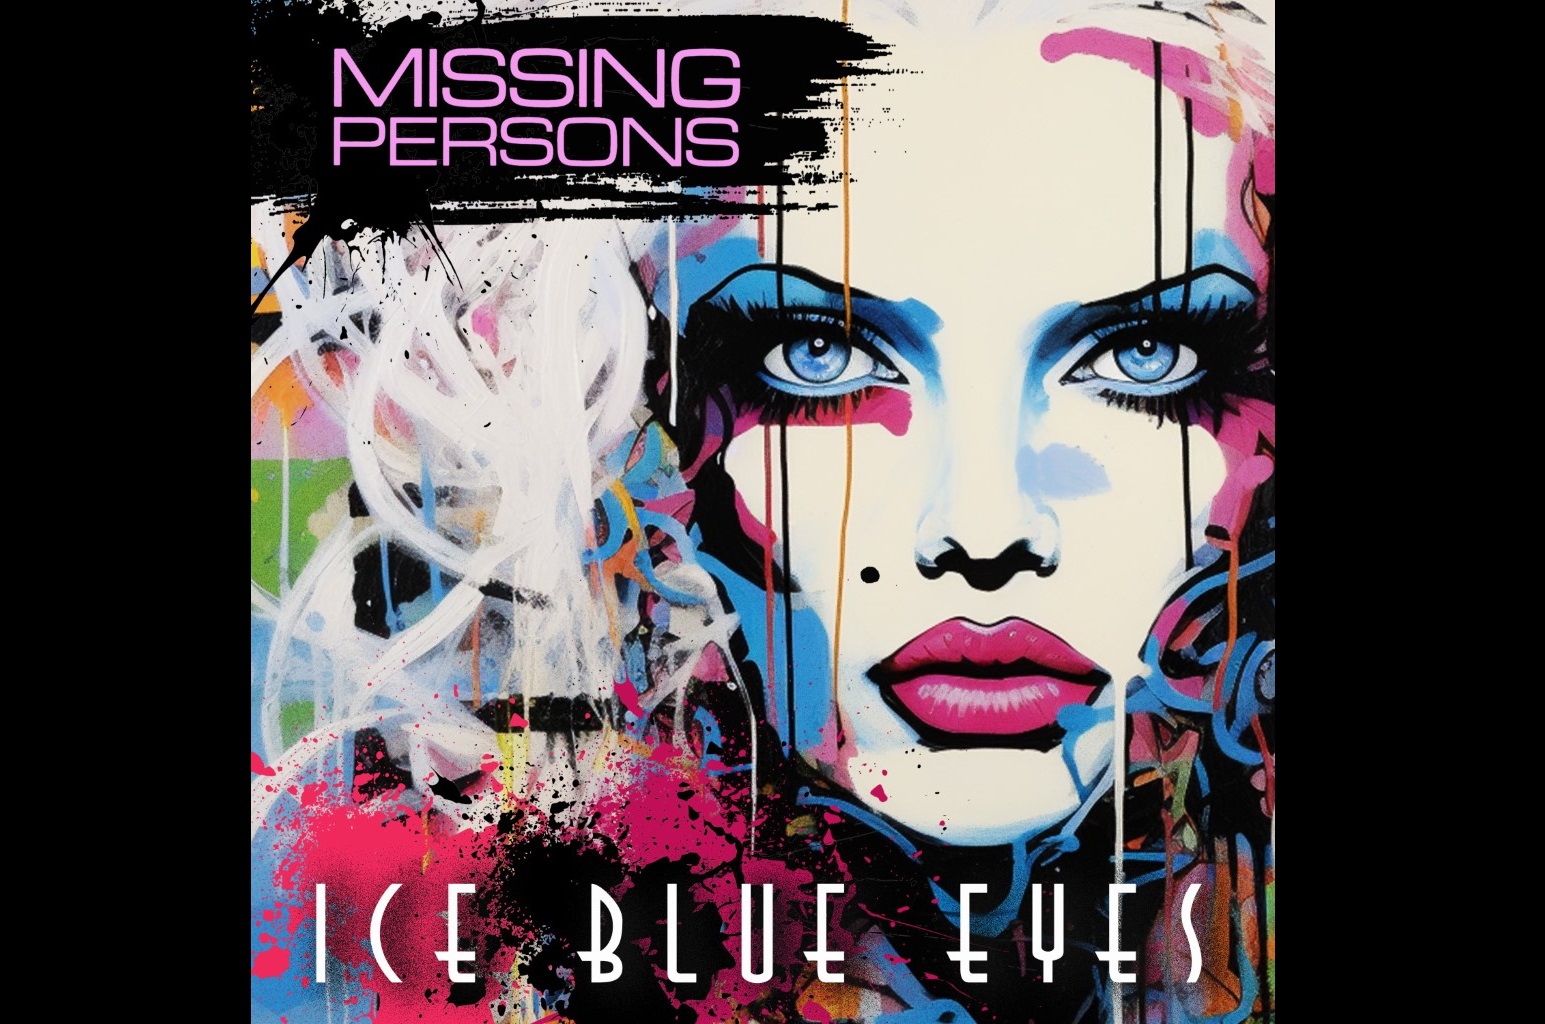 Listen To 80s Icons Missing Persons Brand New Song "Ice Blue Eyes"